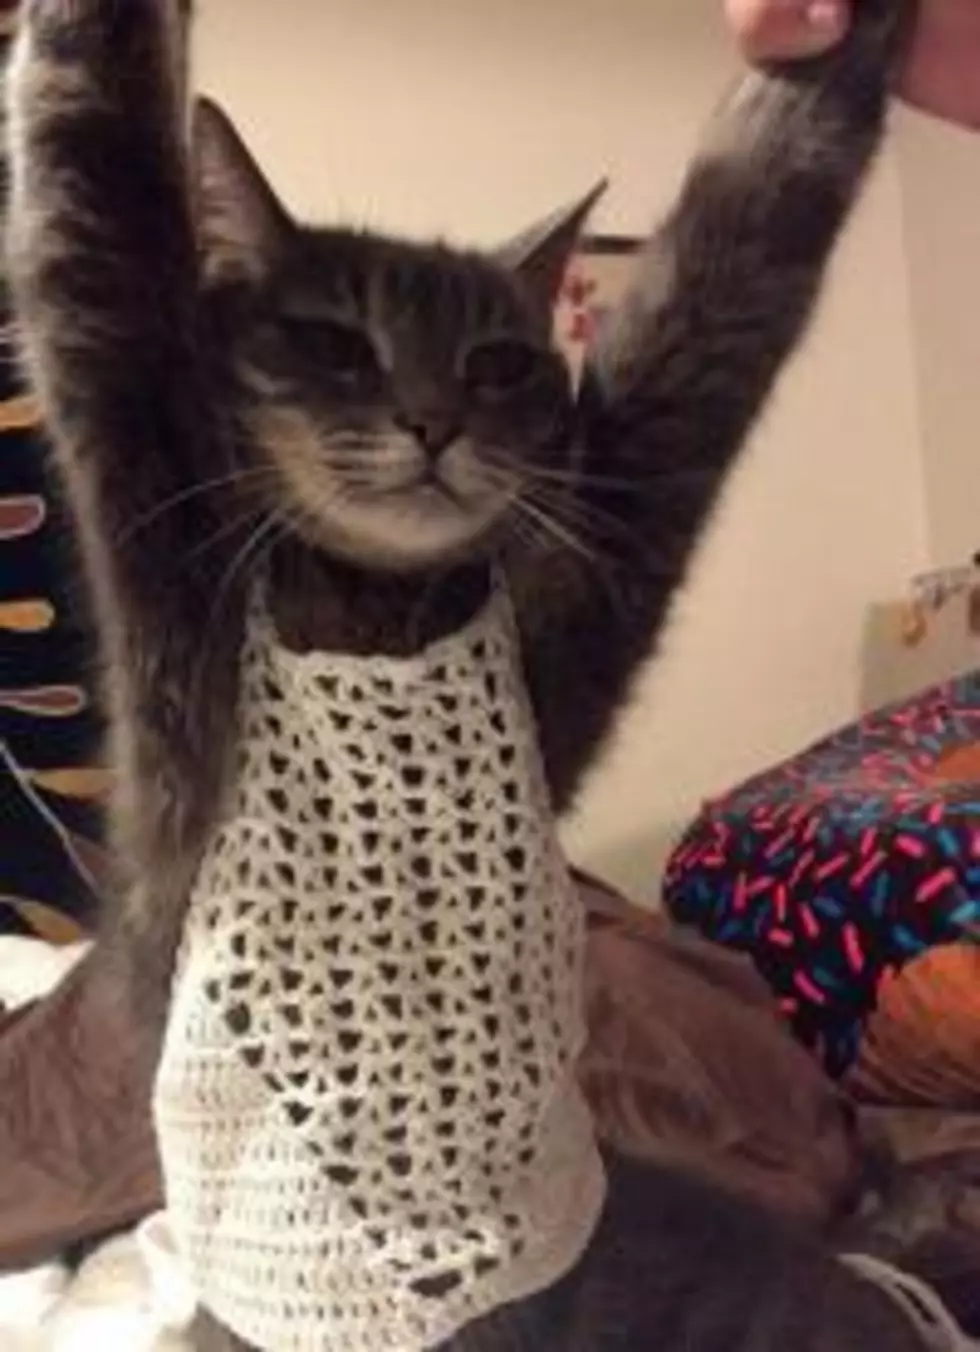 Woman Buys top for Daughter and Gives it to Cat